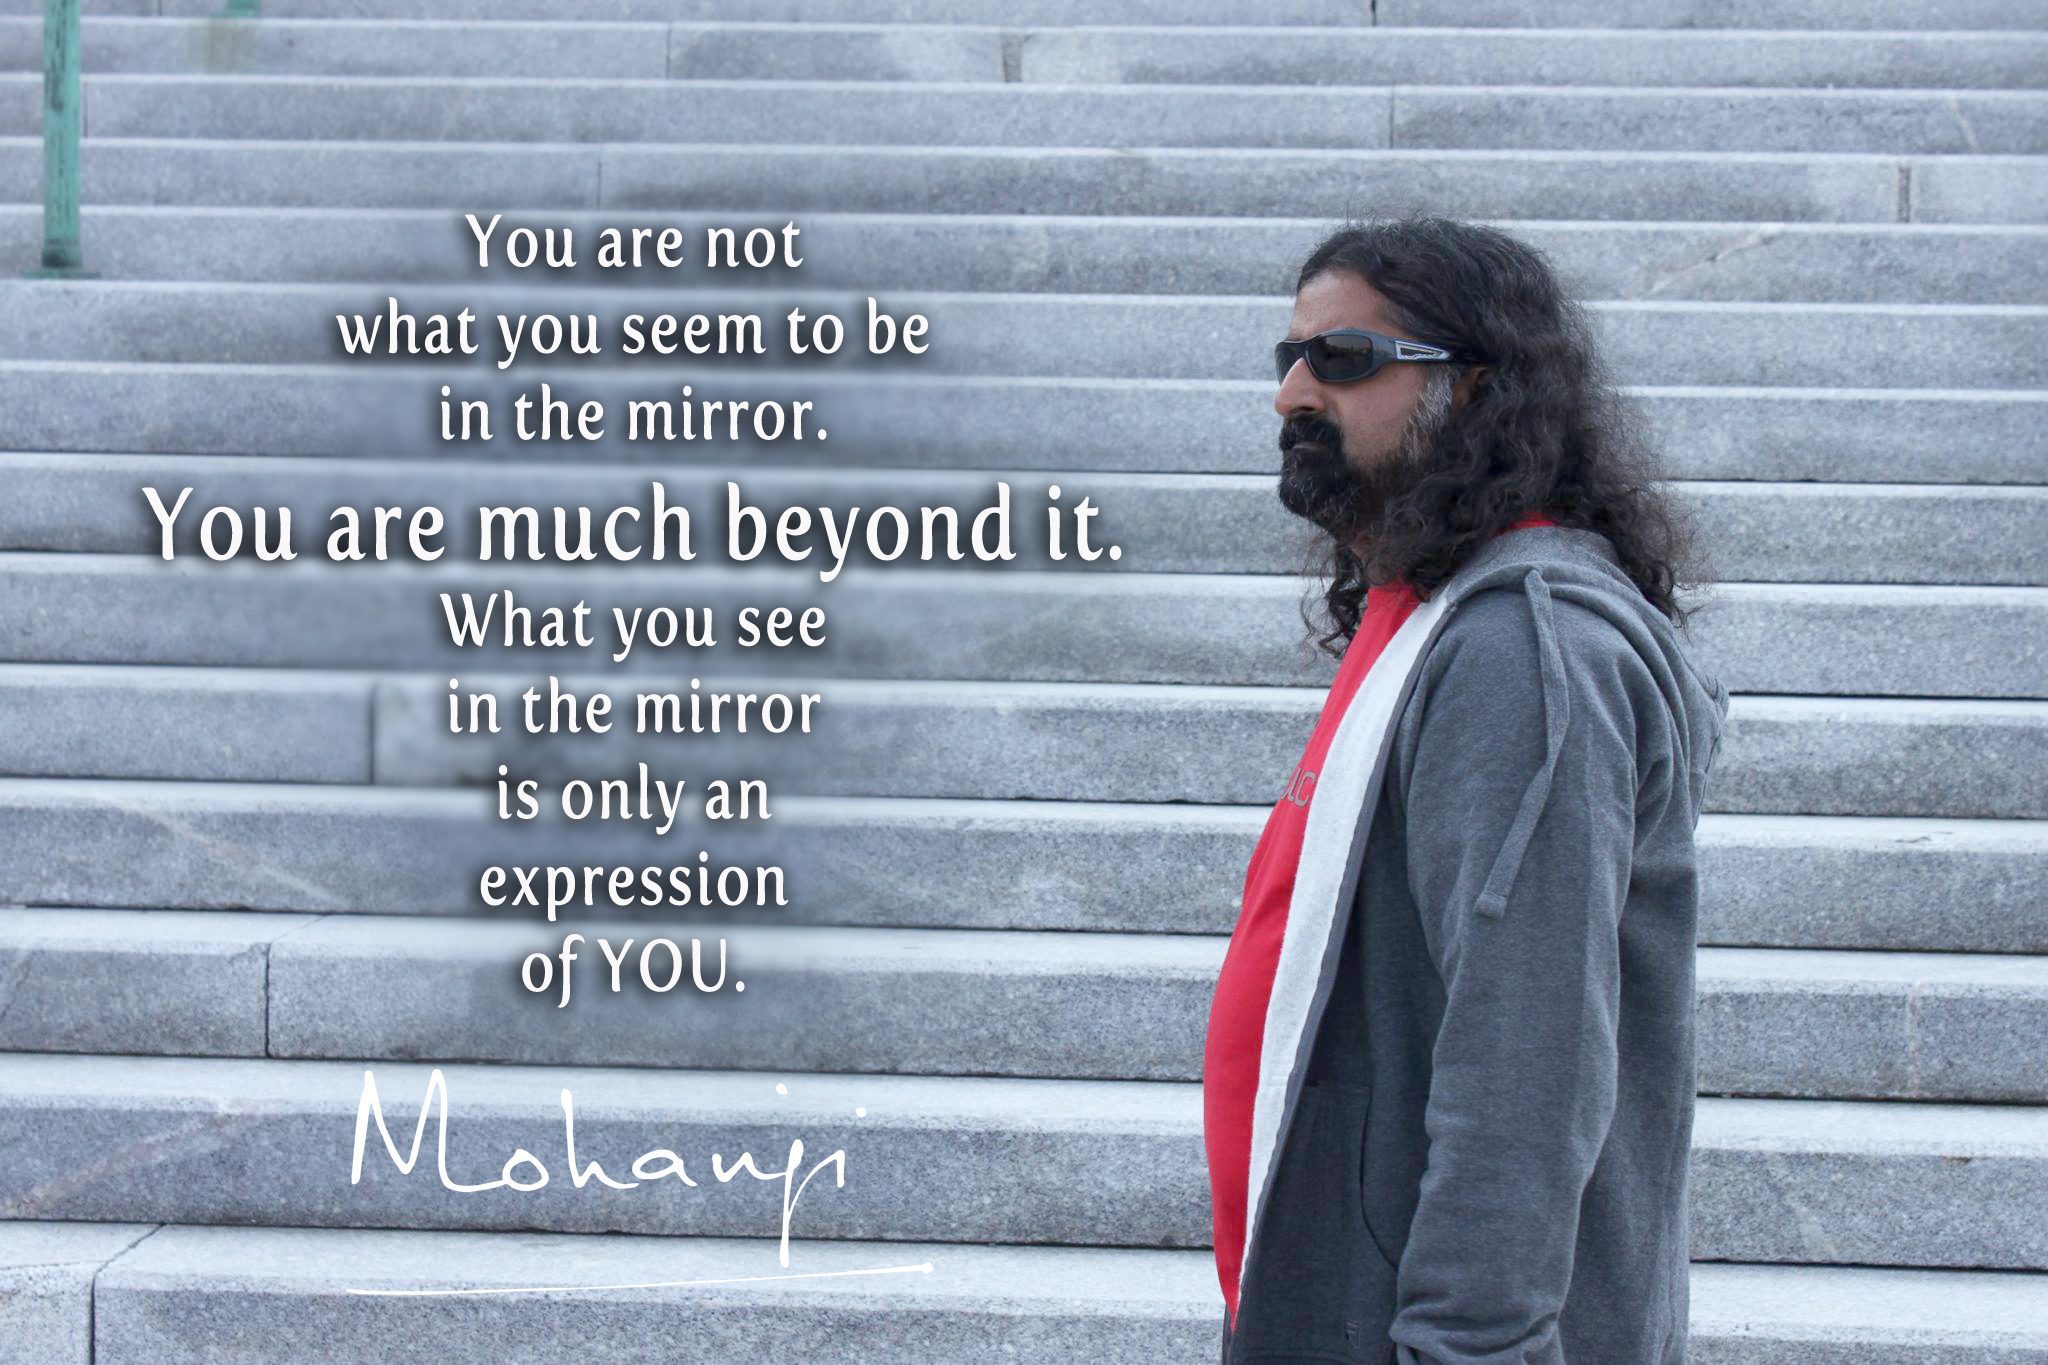 Mohanji quote - You are not what you seem to be in the mirror